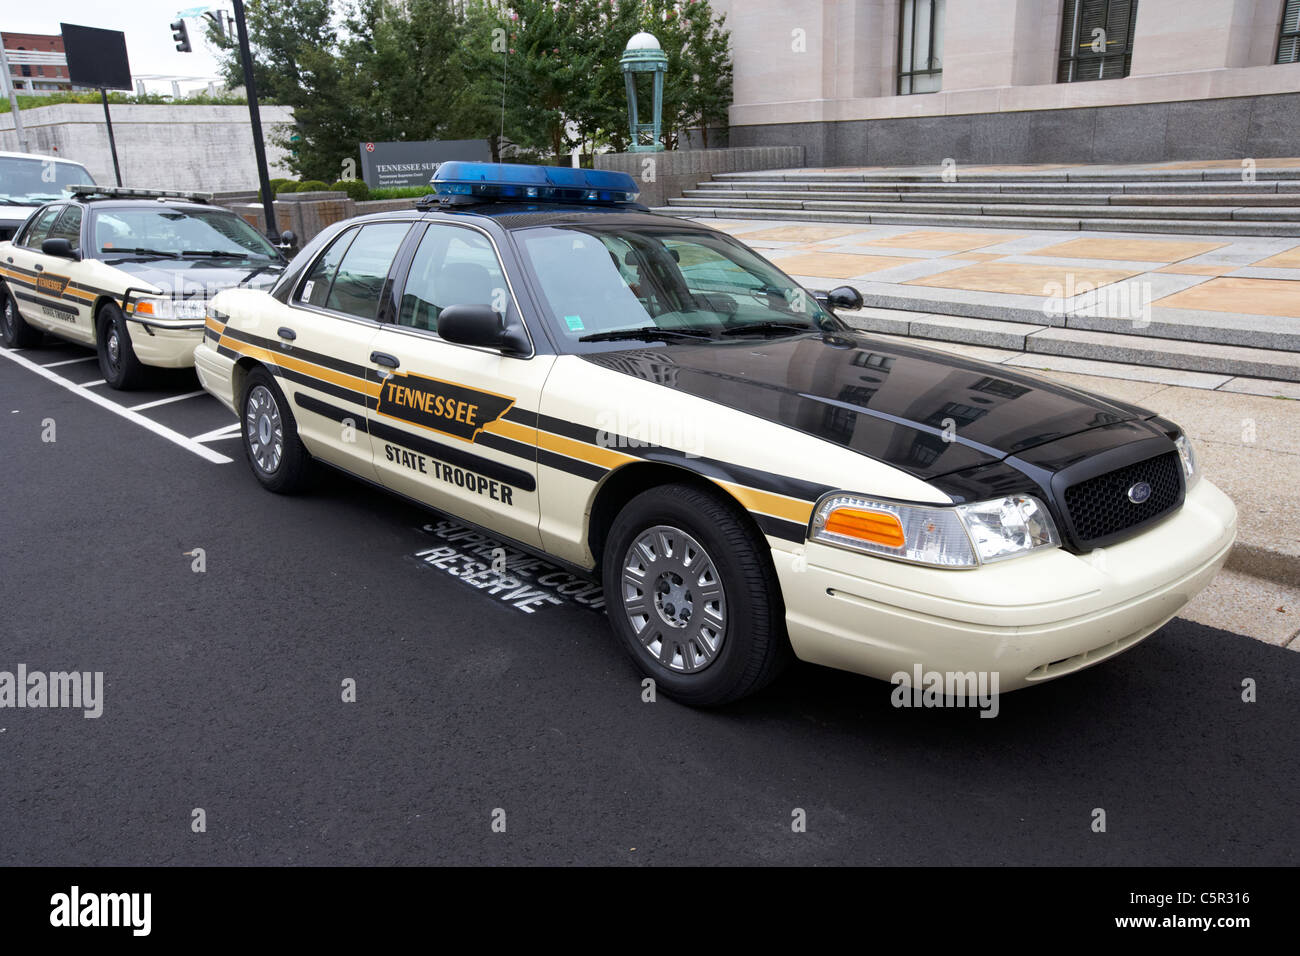 Tennessee state trooper patrol car Nashville Tennessee USA Stock Photo